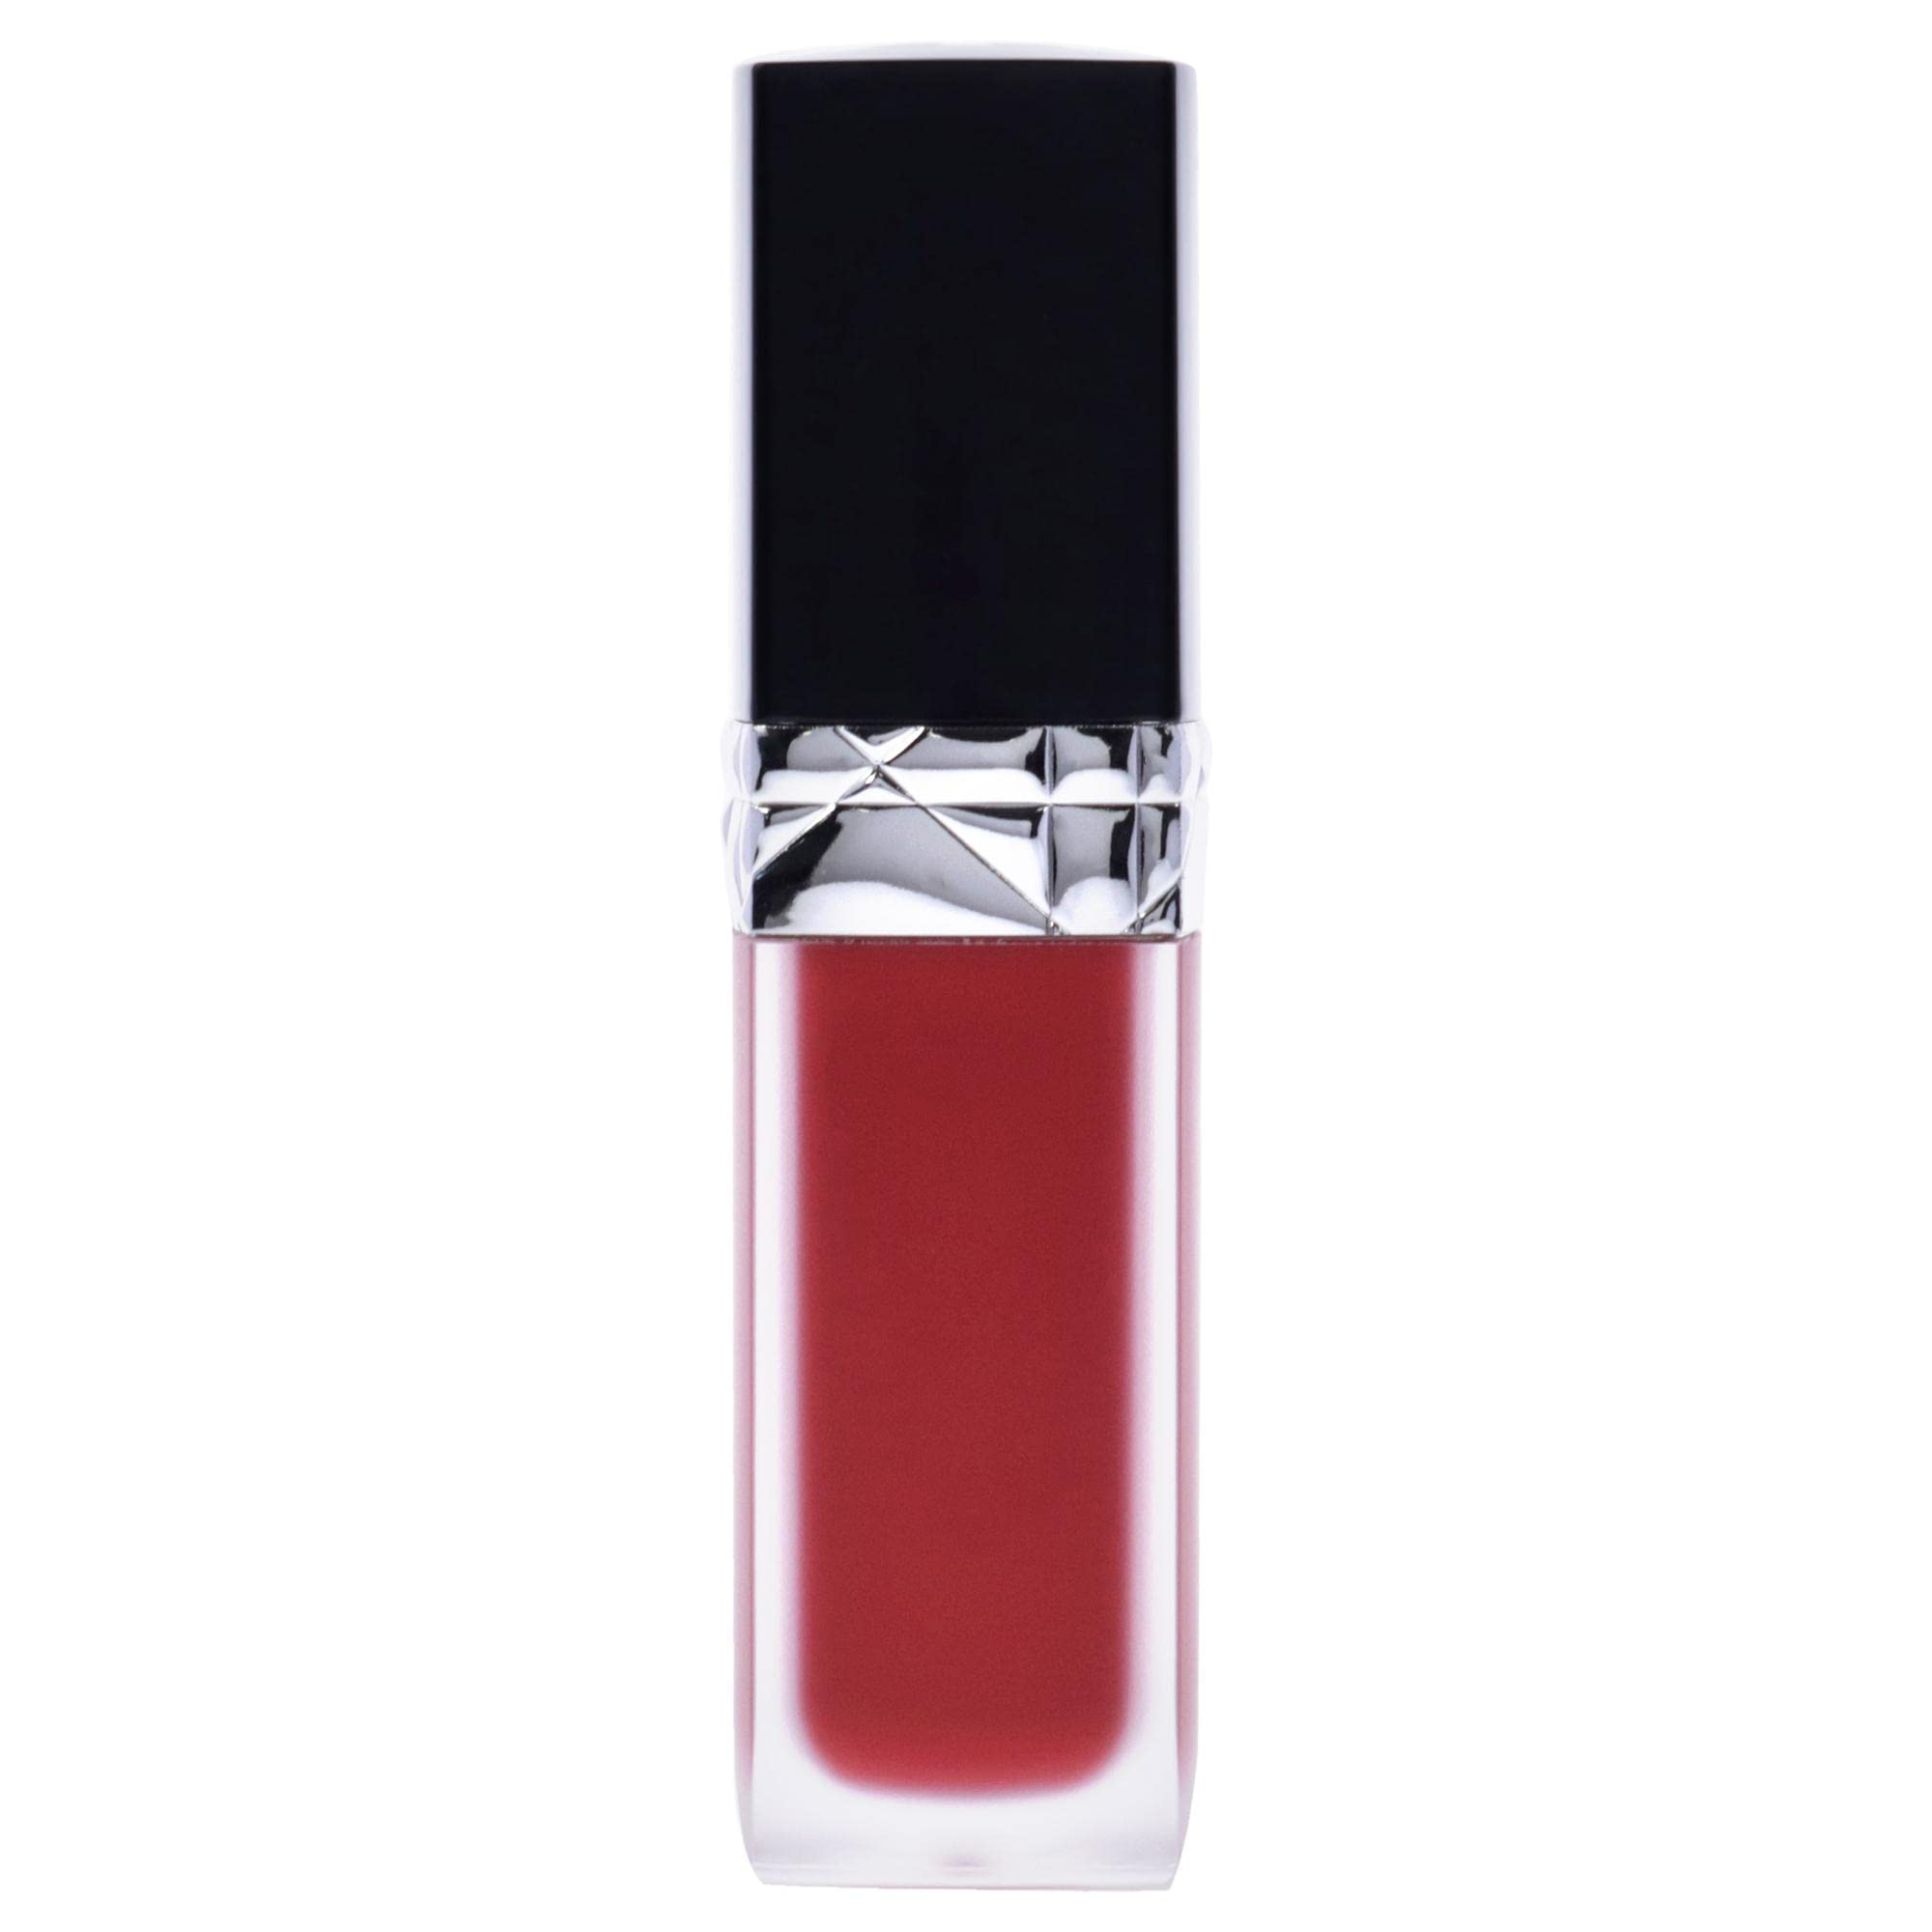 Rouge Dior Forever Liquid Transfer Proof Lipstick Review  Glamour n Glow